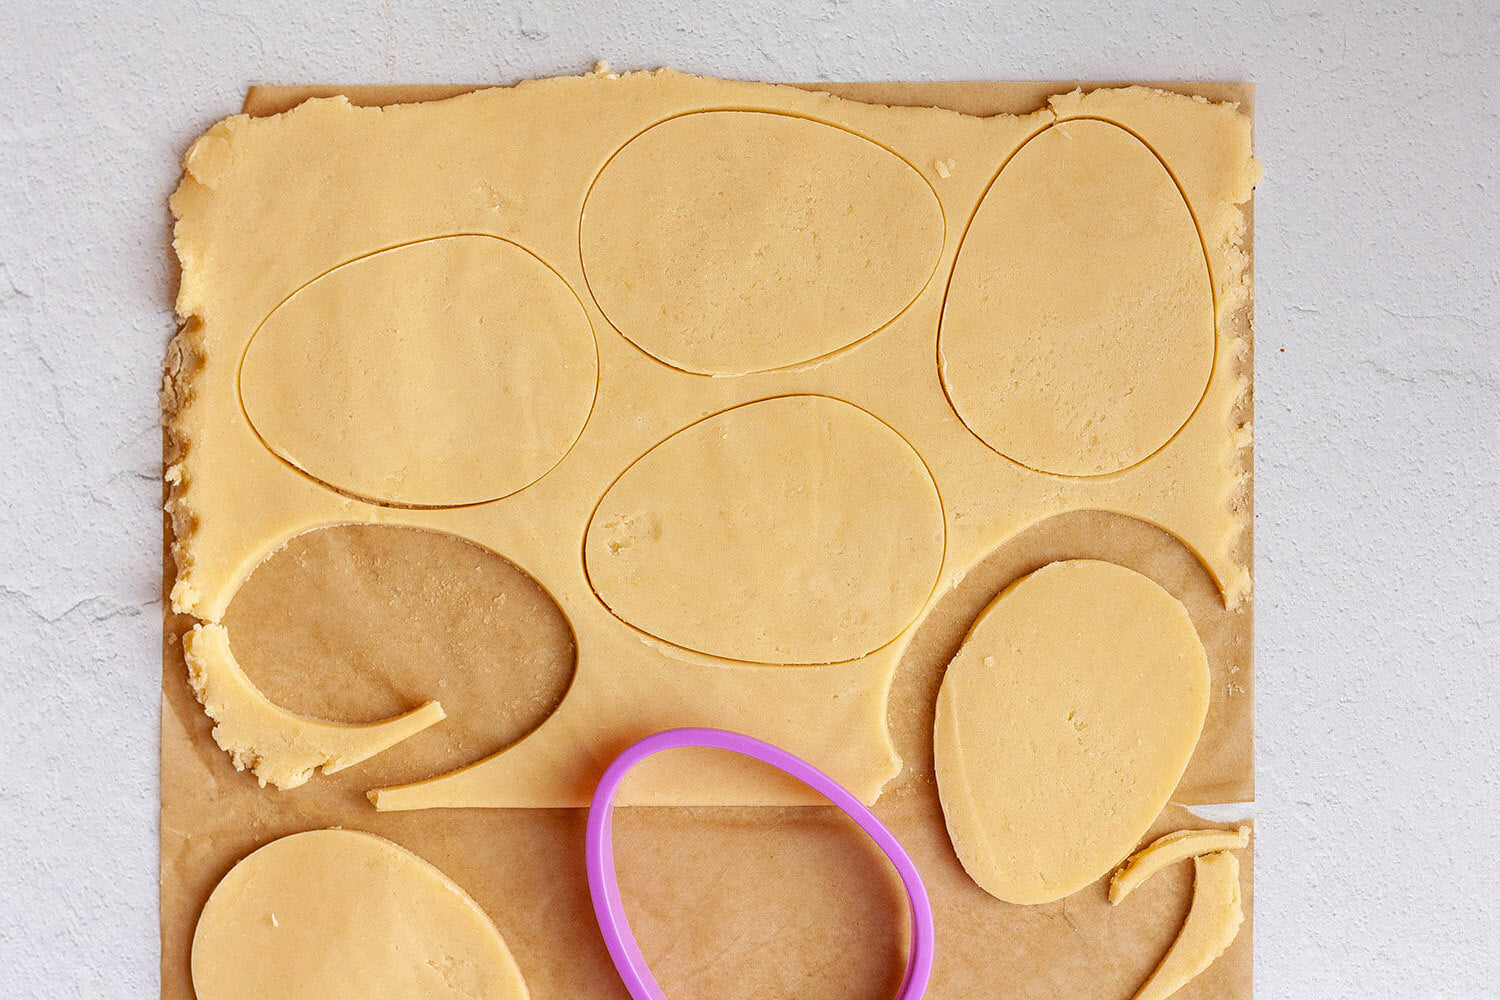 Cutting egg shapes out of cookie dough